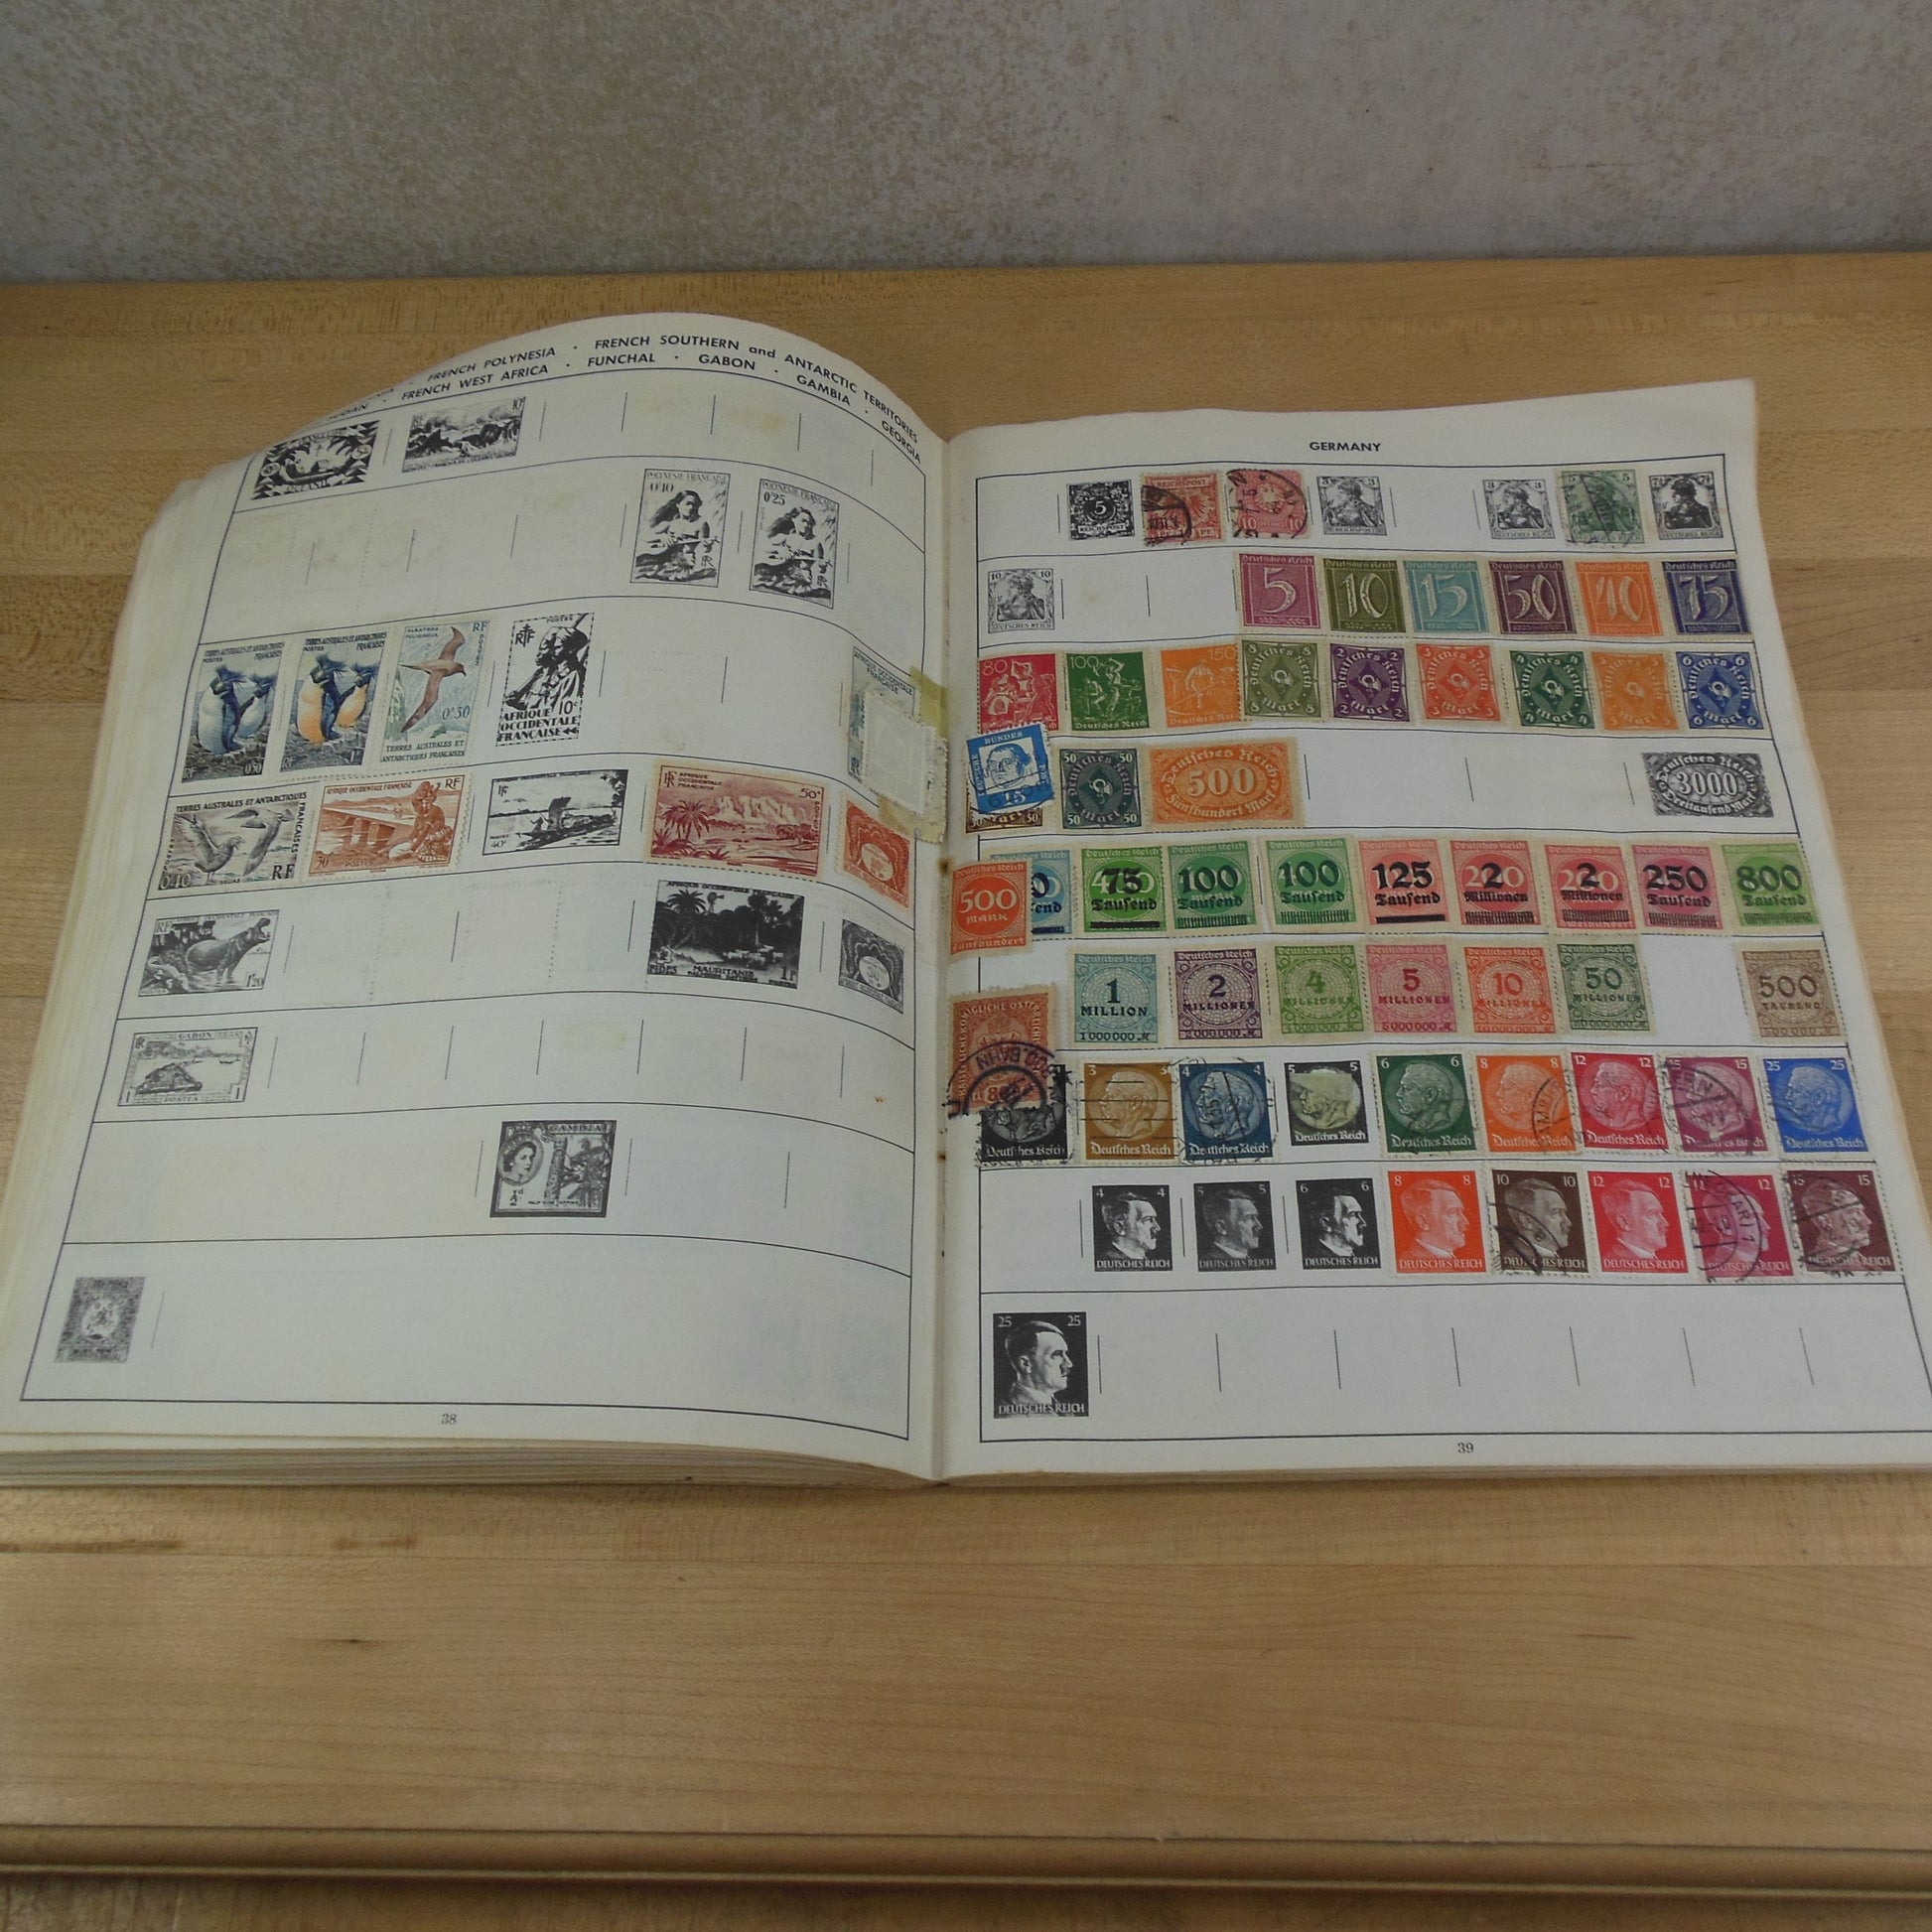 1954 Discoverer Stamp Album - household items - by owner - housewares sale  - craigslist